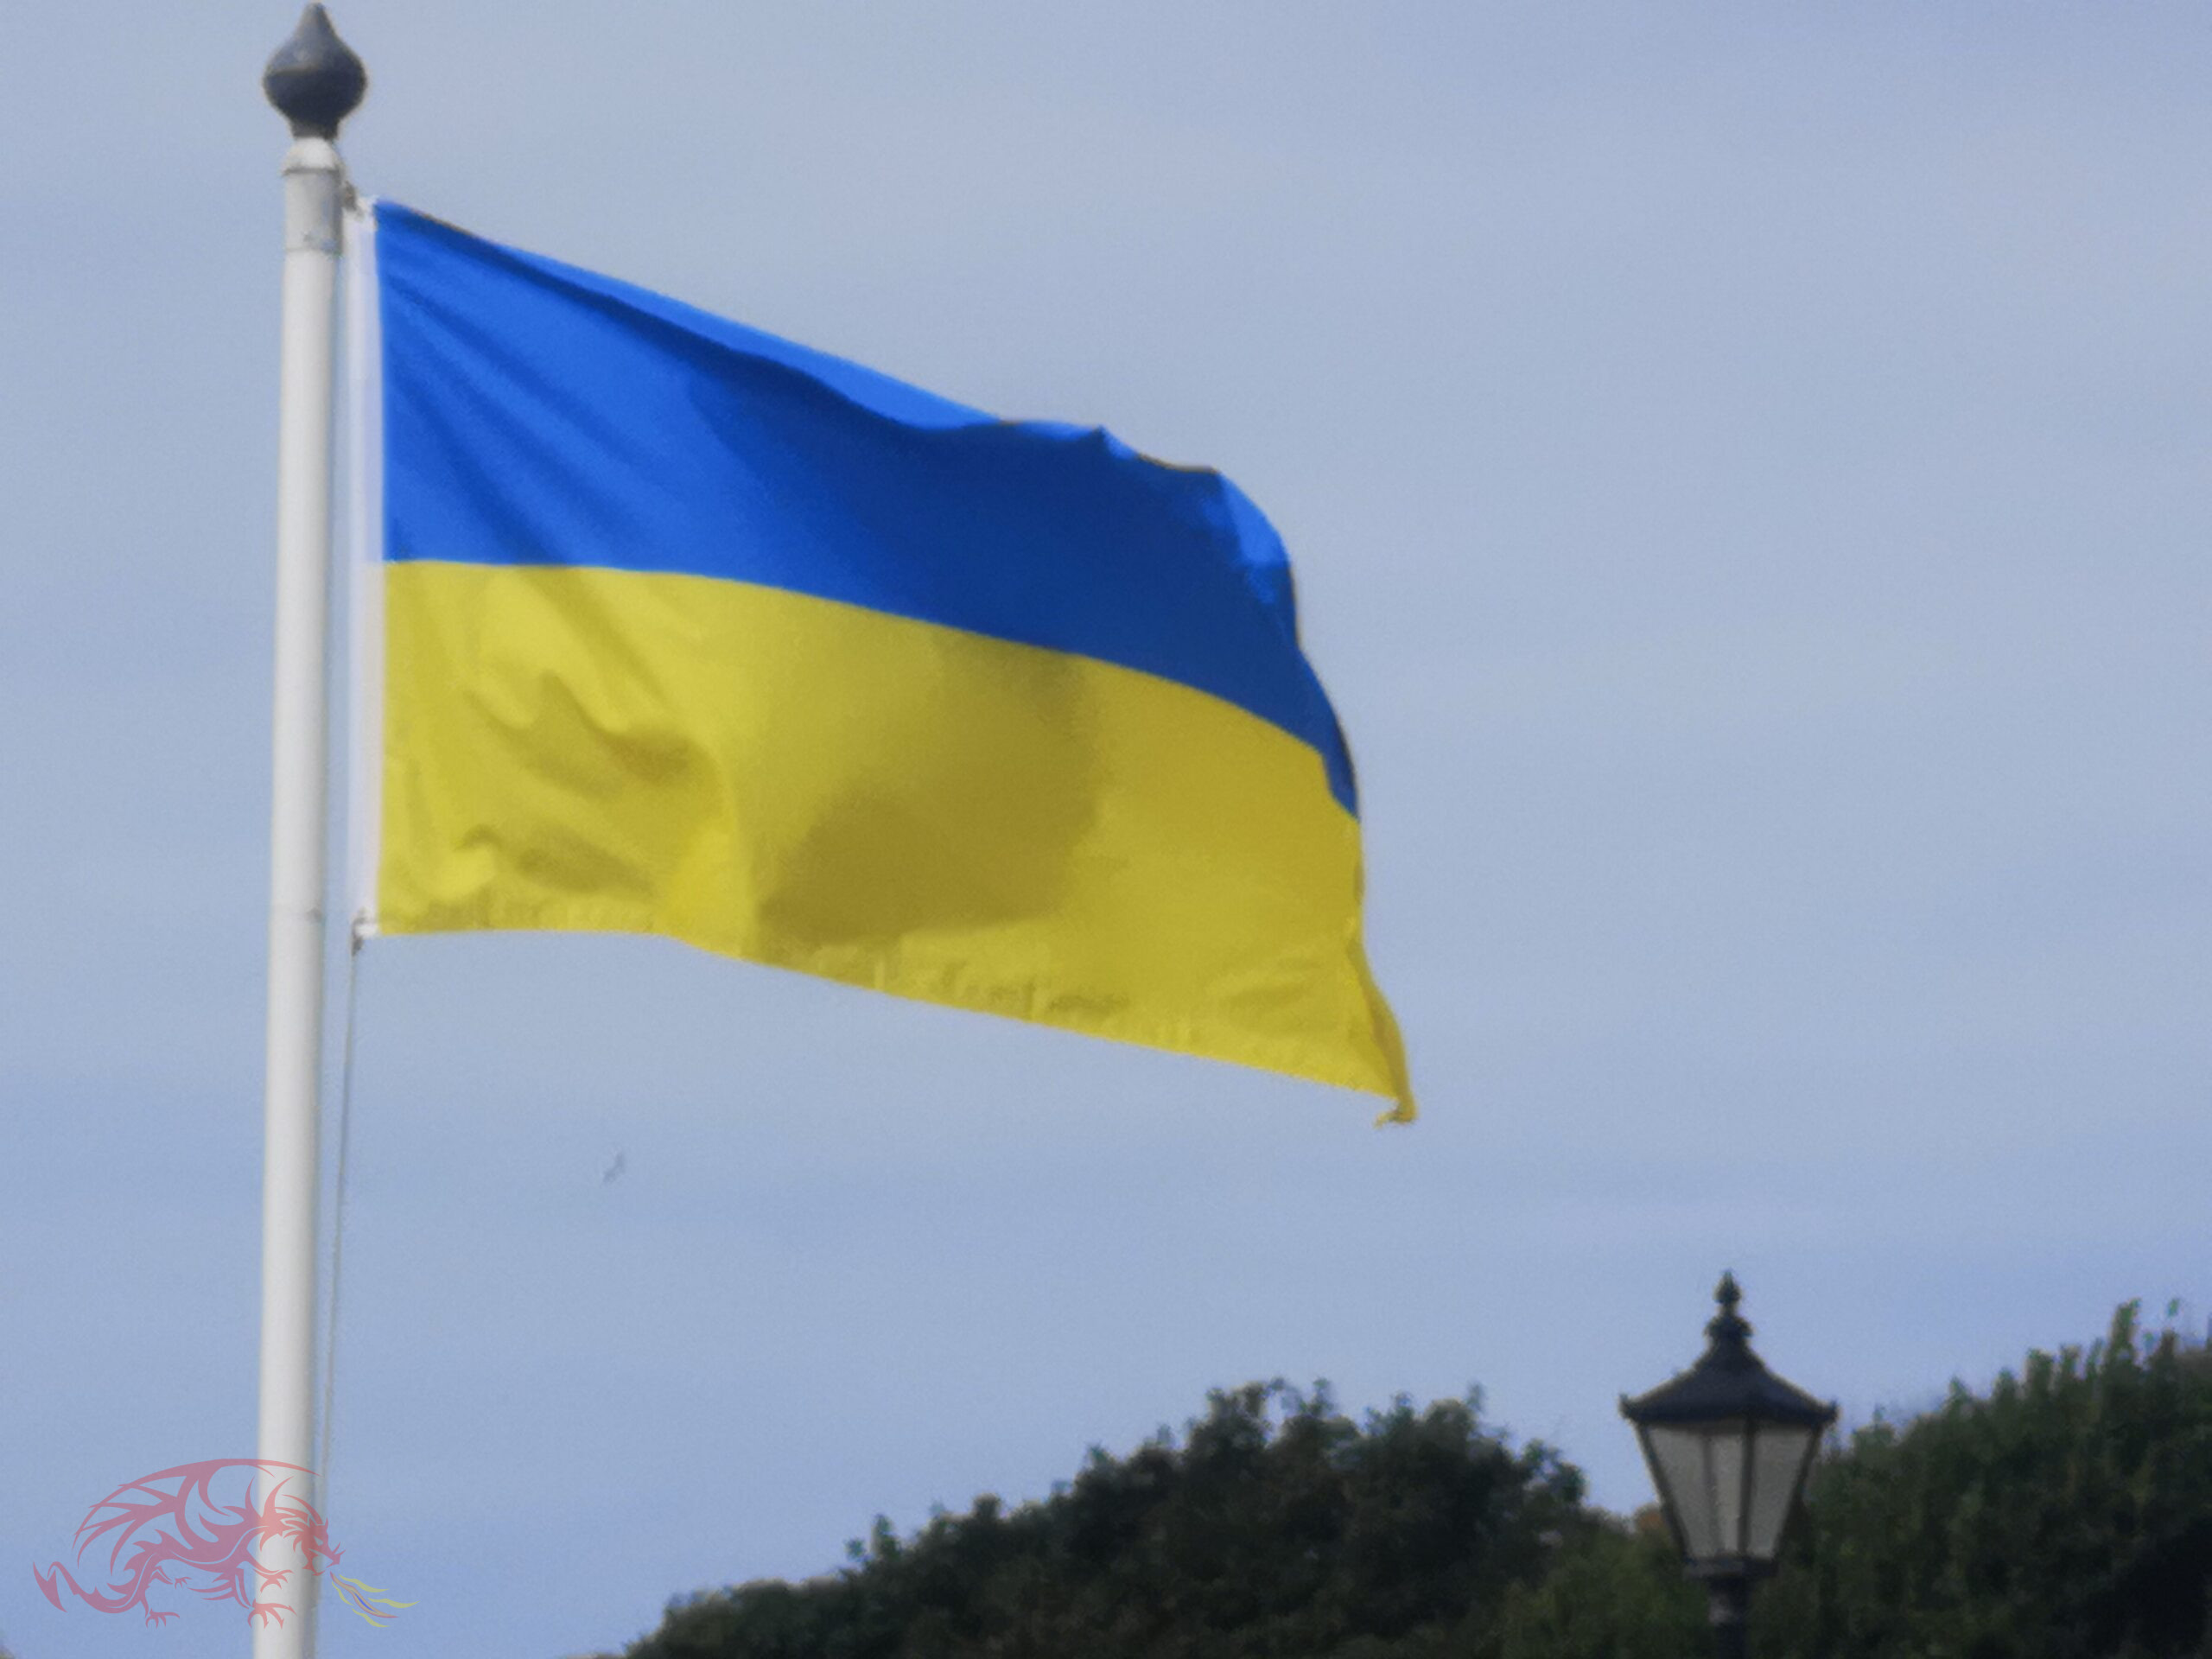 More than 500 people from Ukraine find a place of their own in Wales